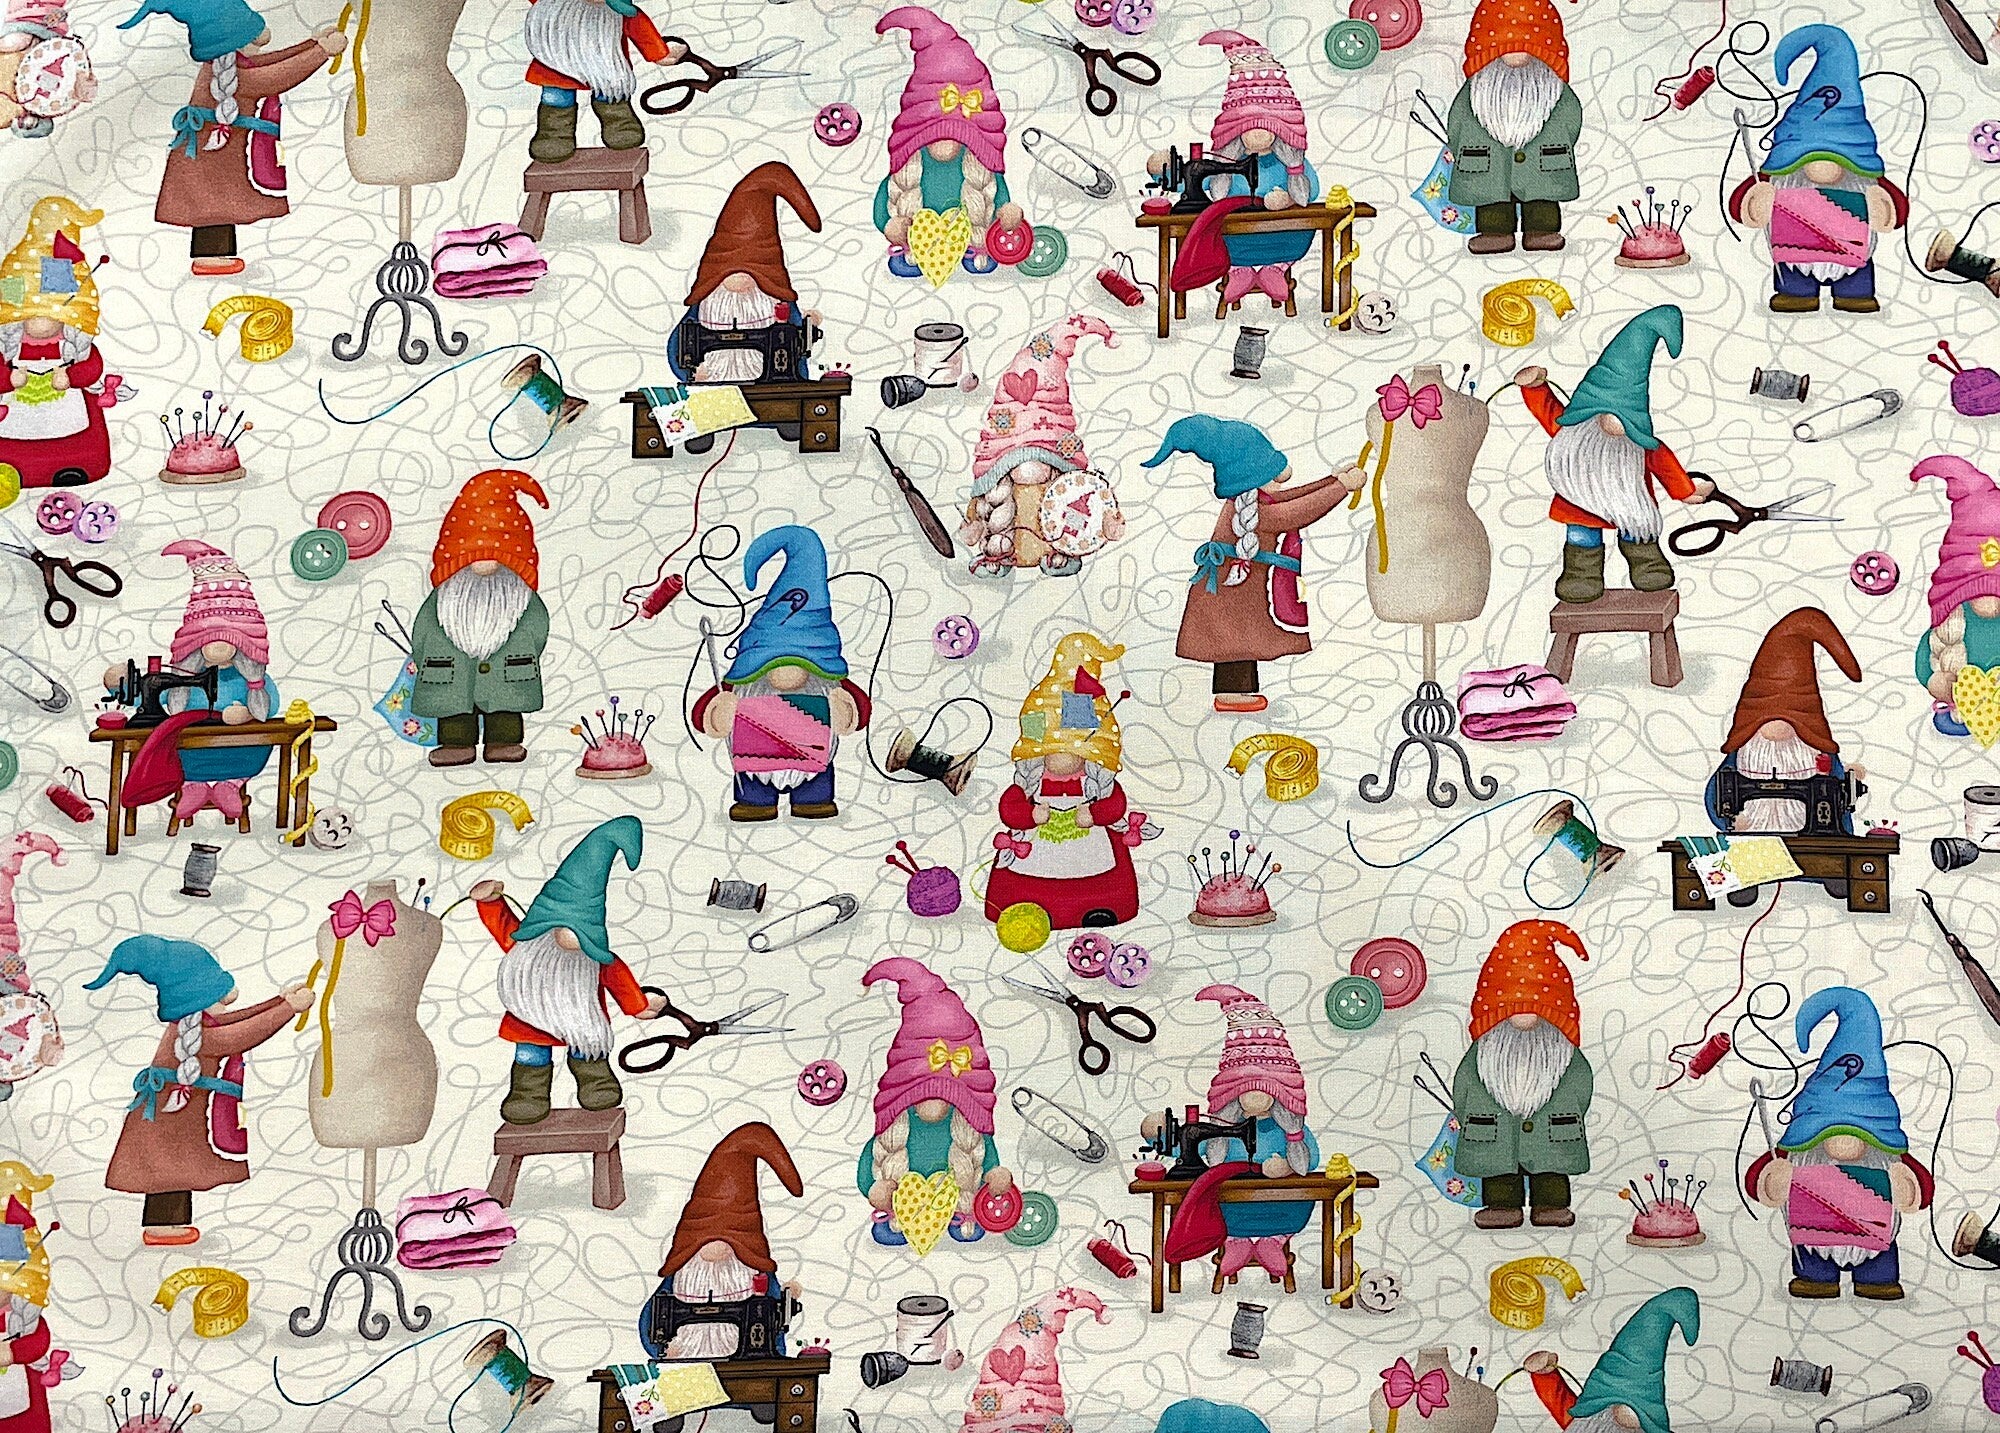 This off white fabric is covered with sewing gnomes. the gnomes are at the sewing machine, holding scissors, knitting and more. There are also spools of thread, pincushions, seam rippers, buttons and more